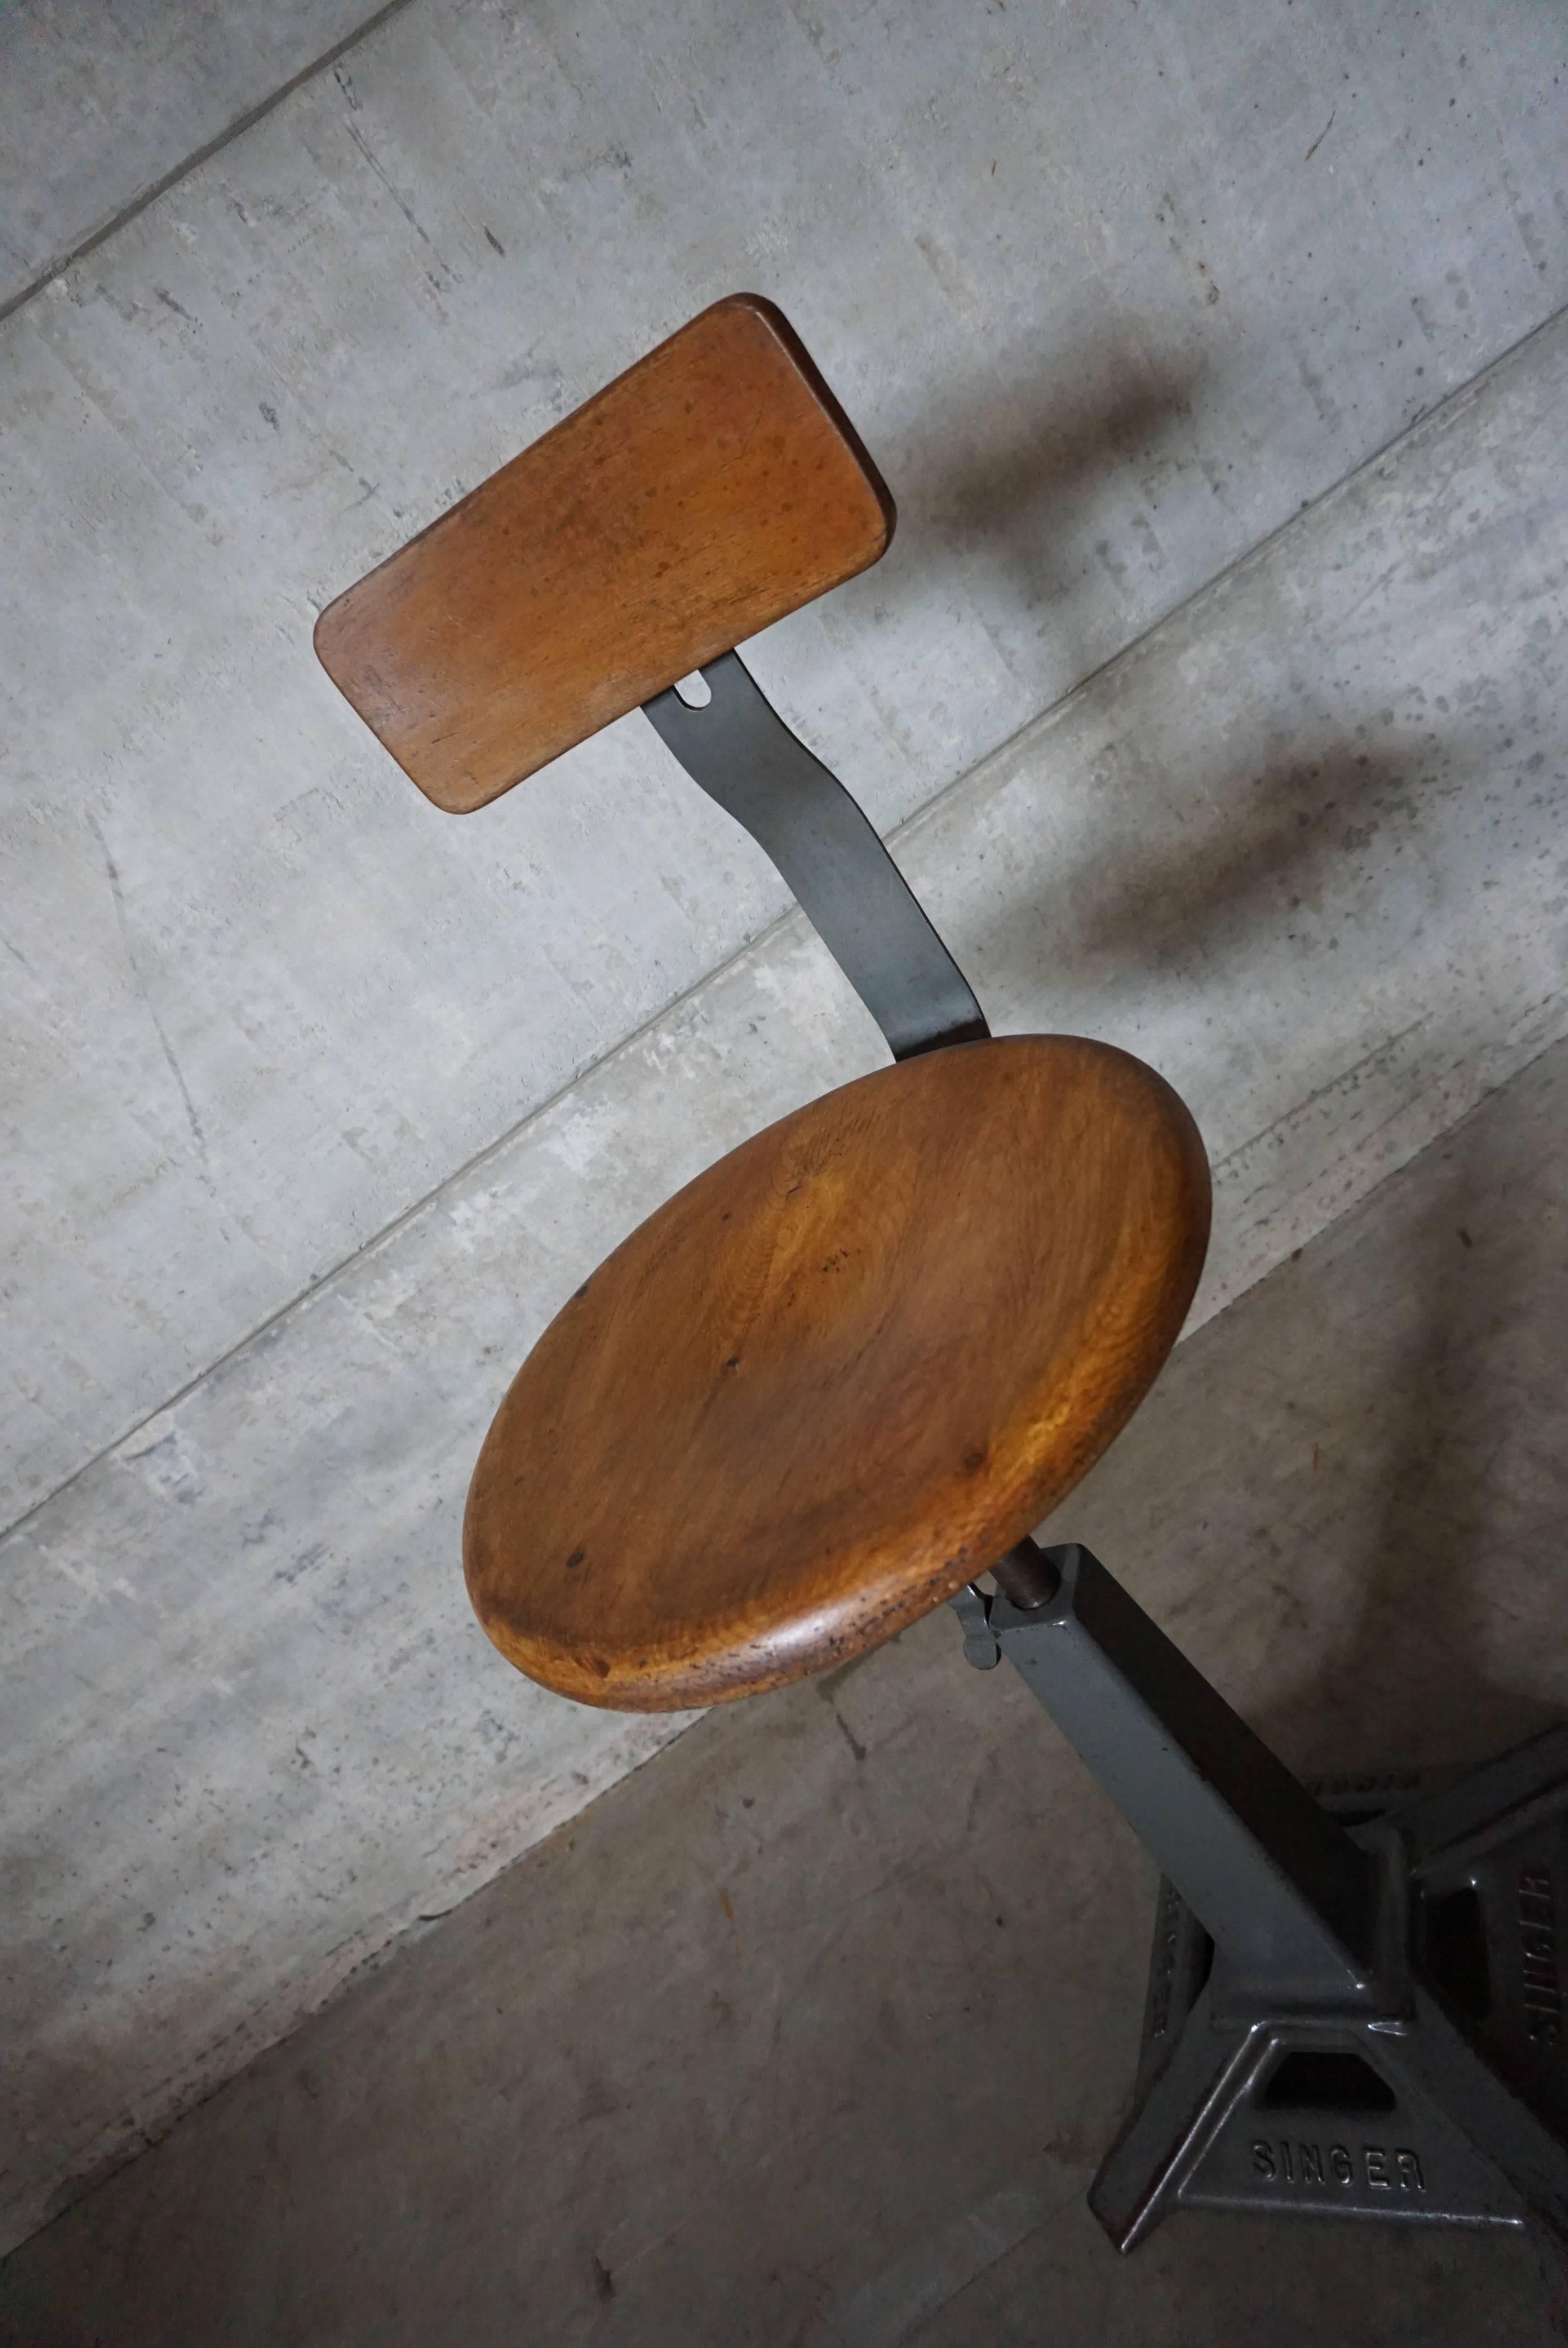 Singer machinist or work chairs. Branded cast iron base with factory painted finish, steam bent ply seat and back rest. Manufactured by “simanco” the Singer manufacturing company, England, 1930s.